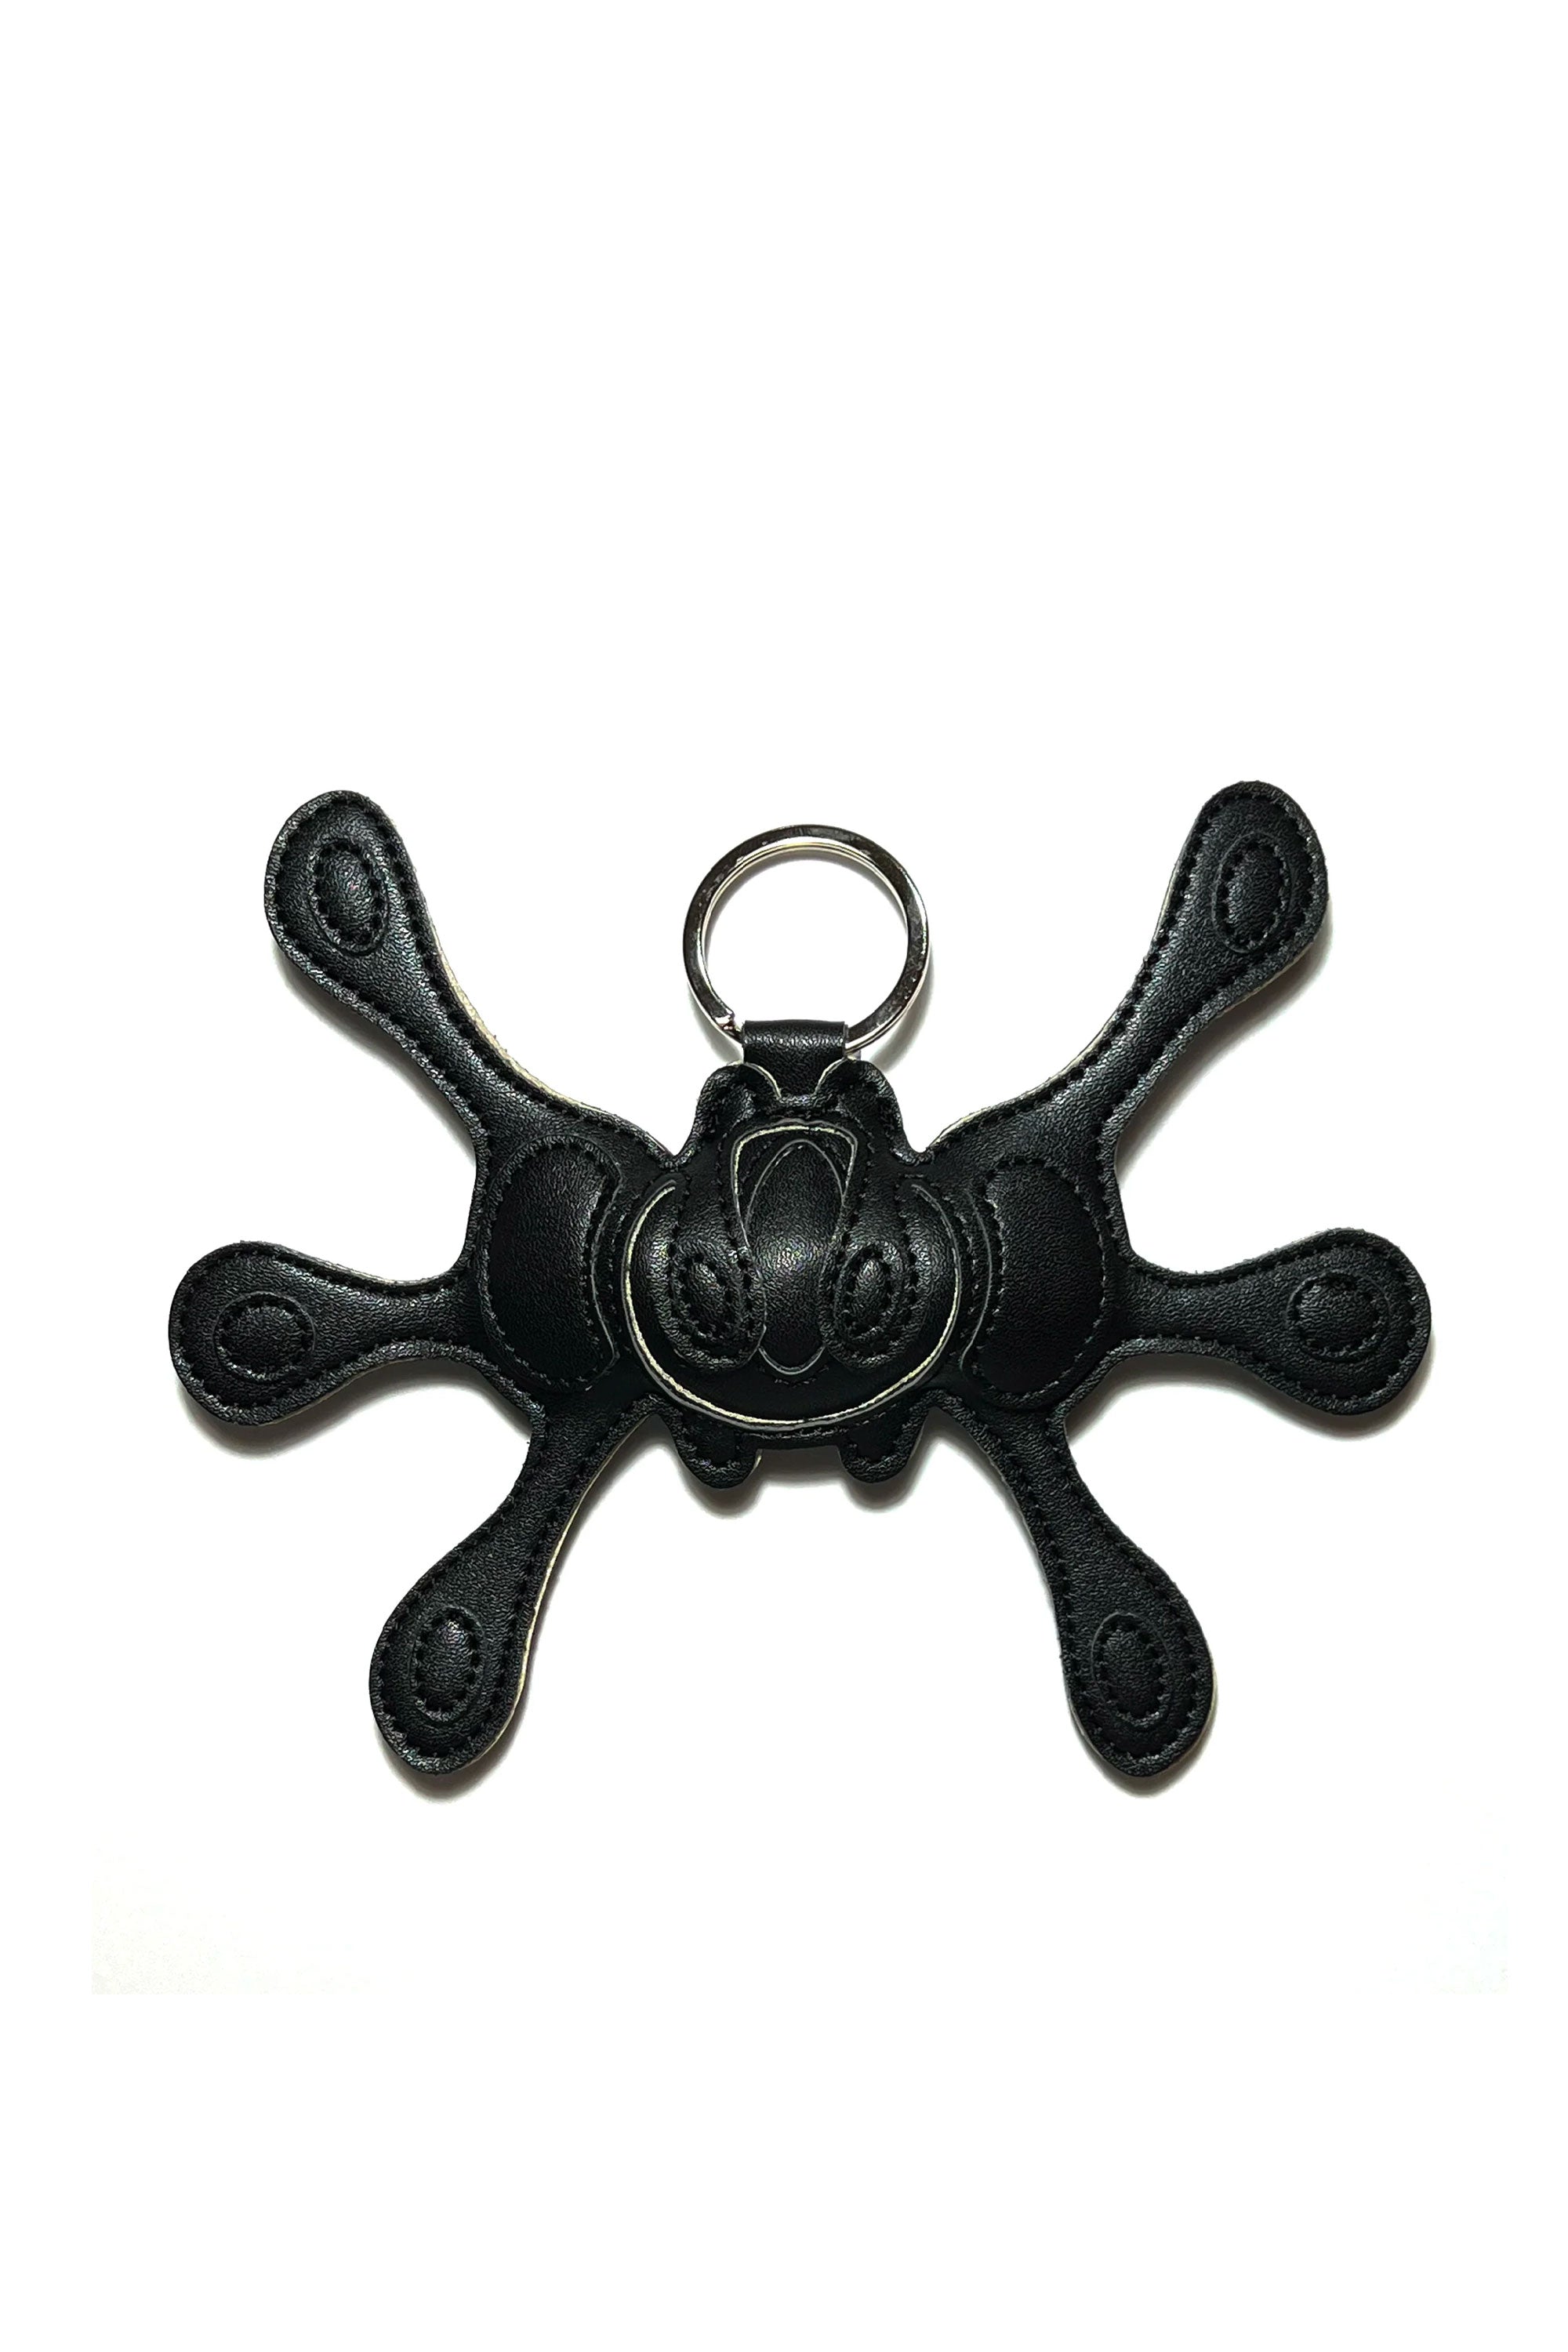 The HAPPY 99 - ANGEL99 LEATHER KEYCHAIN BLACK available online with global shipping, and in PAM Stores Melbourne and Sydney.